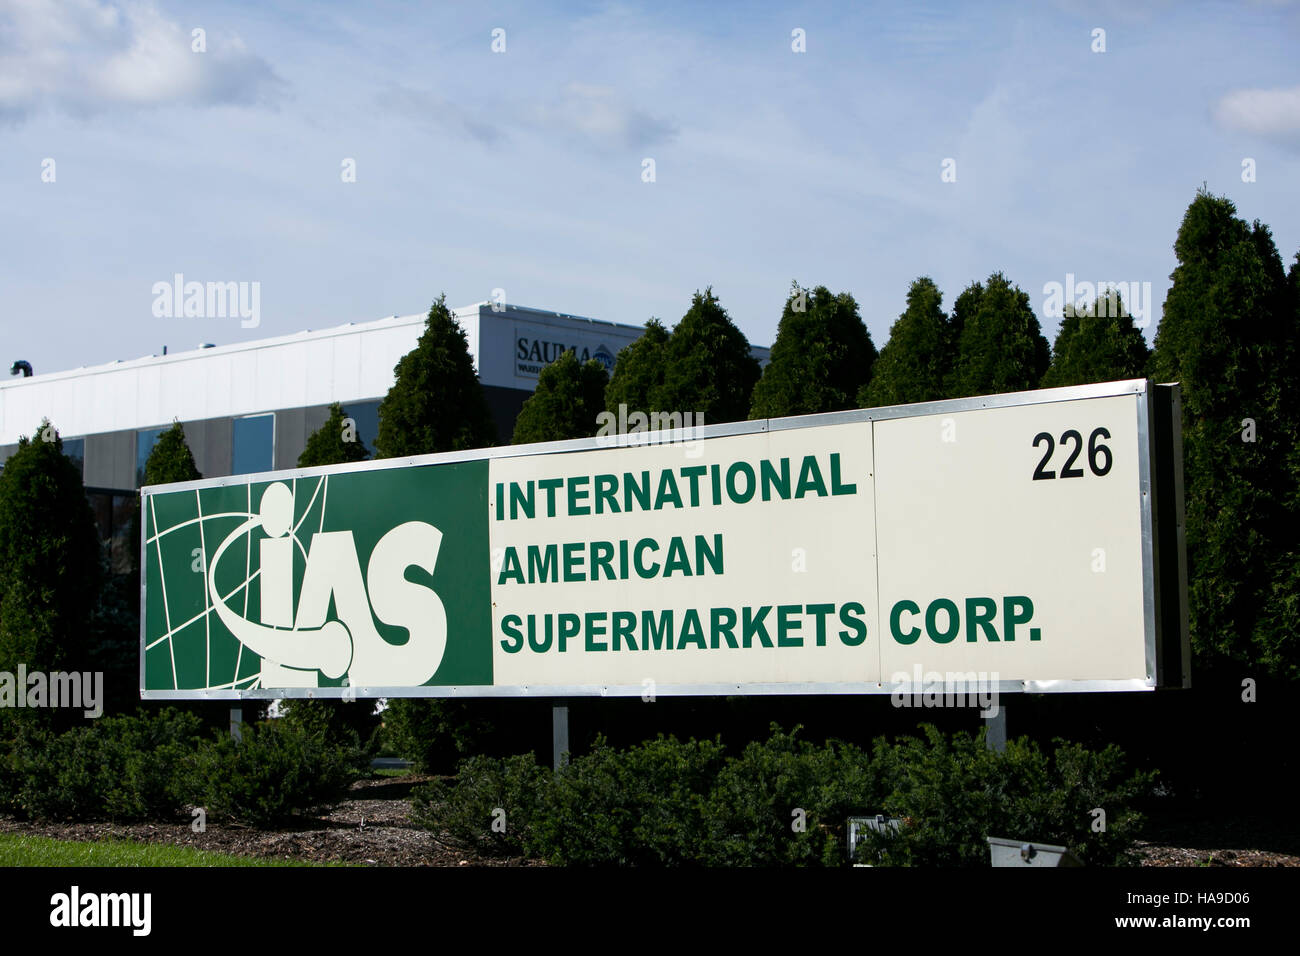 A logo sign outside of a facility occupied by International American Supermarkets Corp., in Piscataway Township, New Jersey on November 6, 2016. Stock Photo